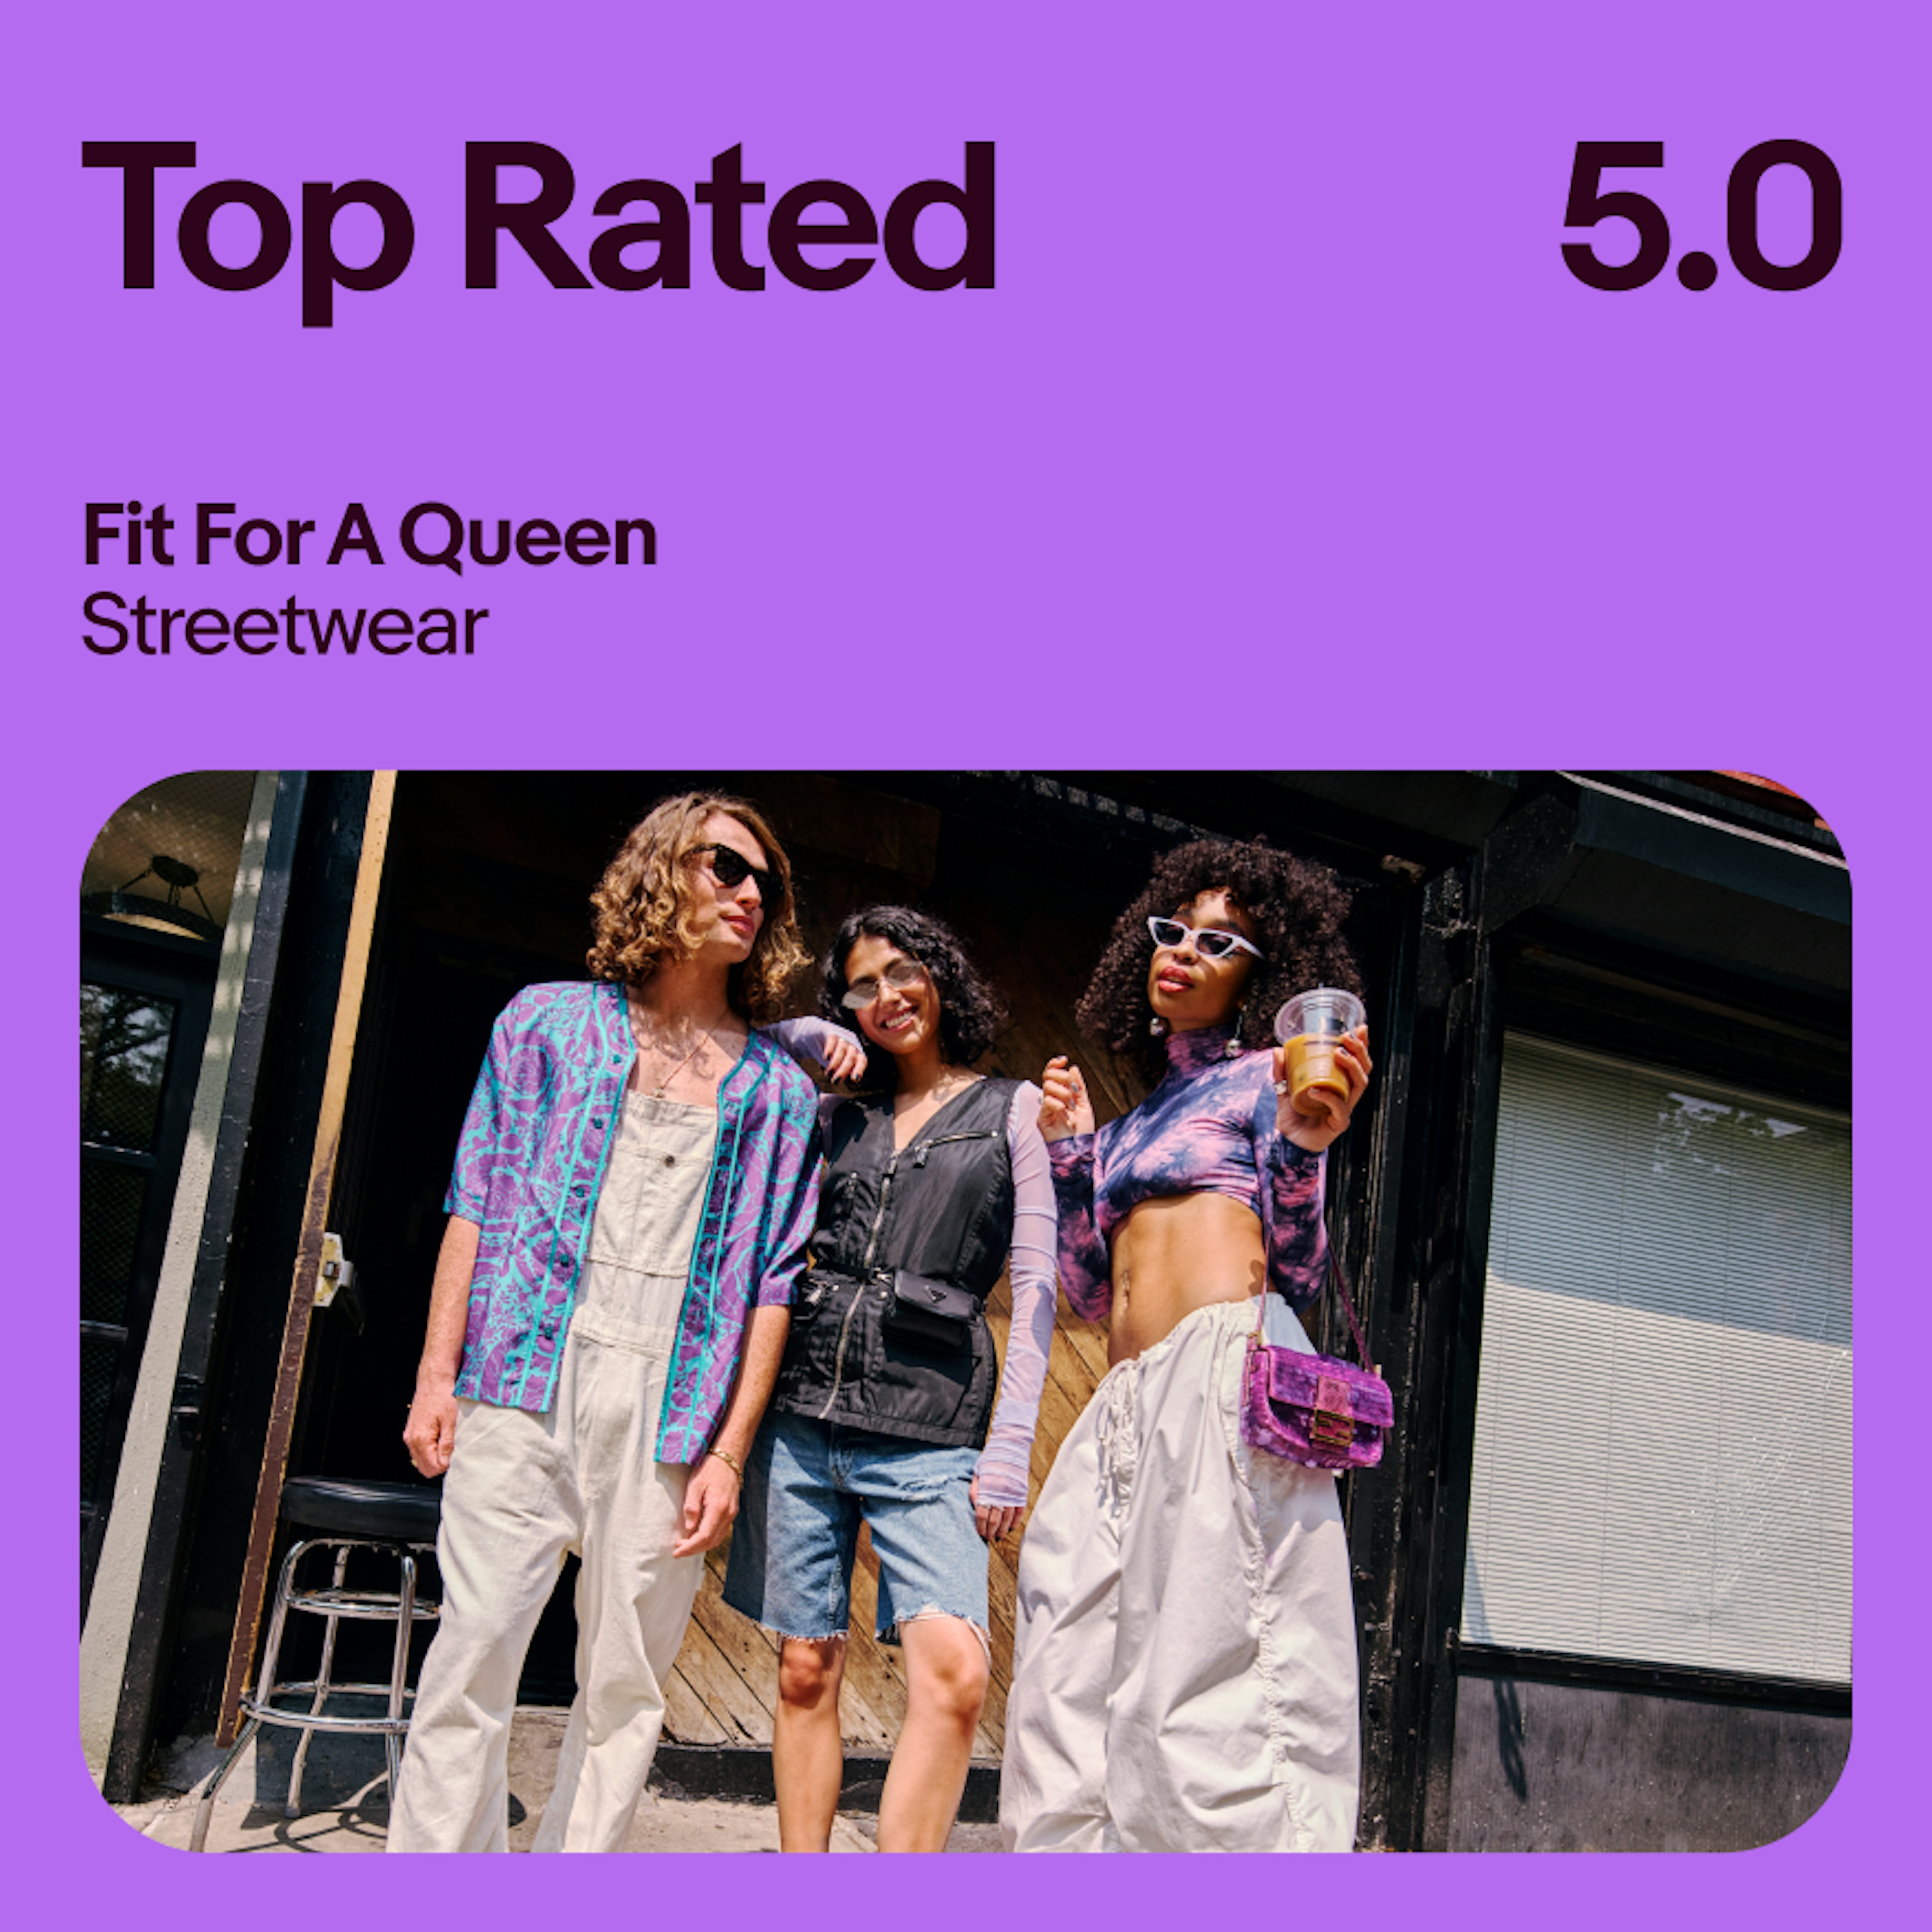 A vibrant purple ad with an image of 3 people wearing fashionable clothes. The type at the top is using approved letter spacing.